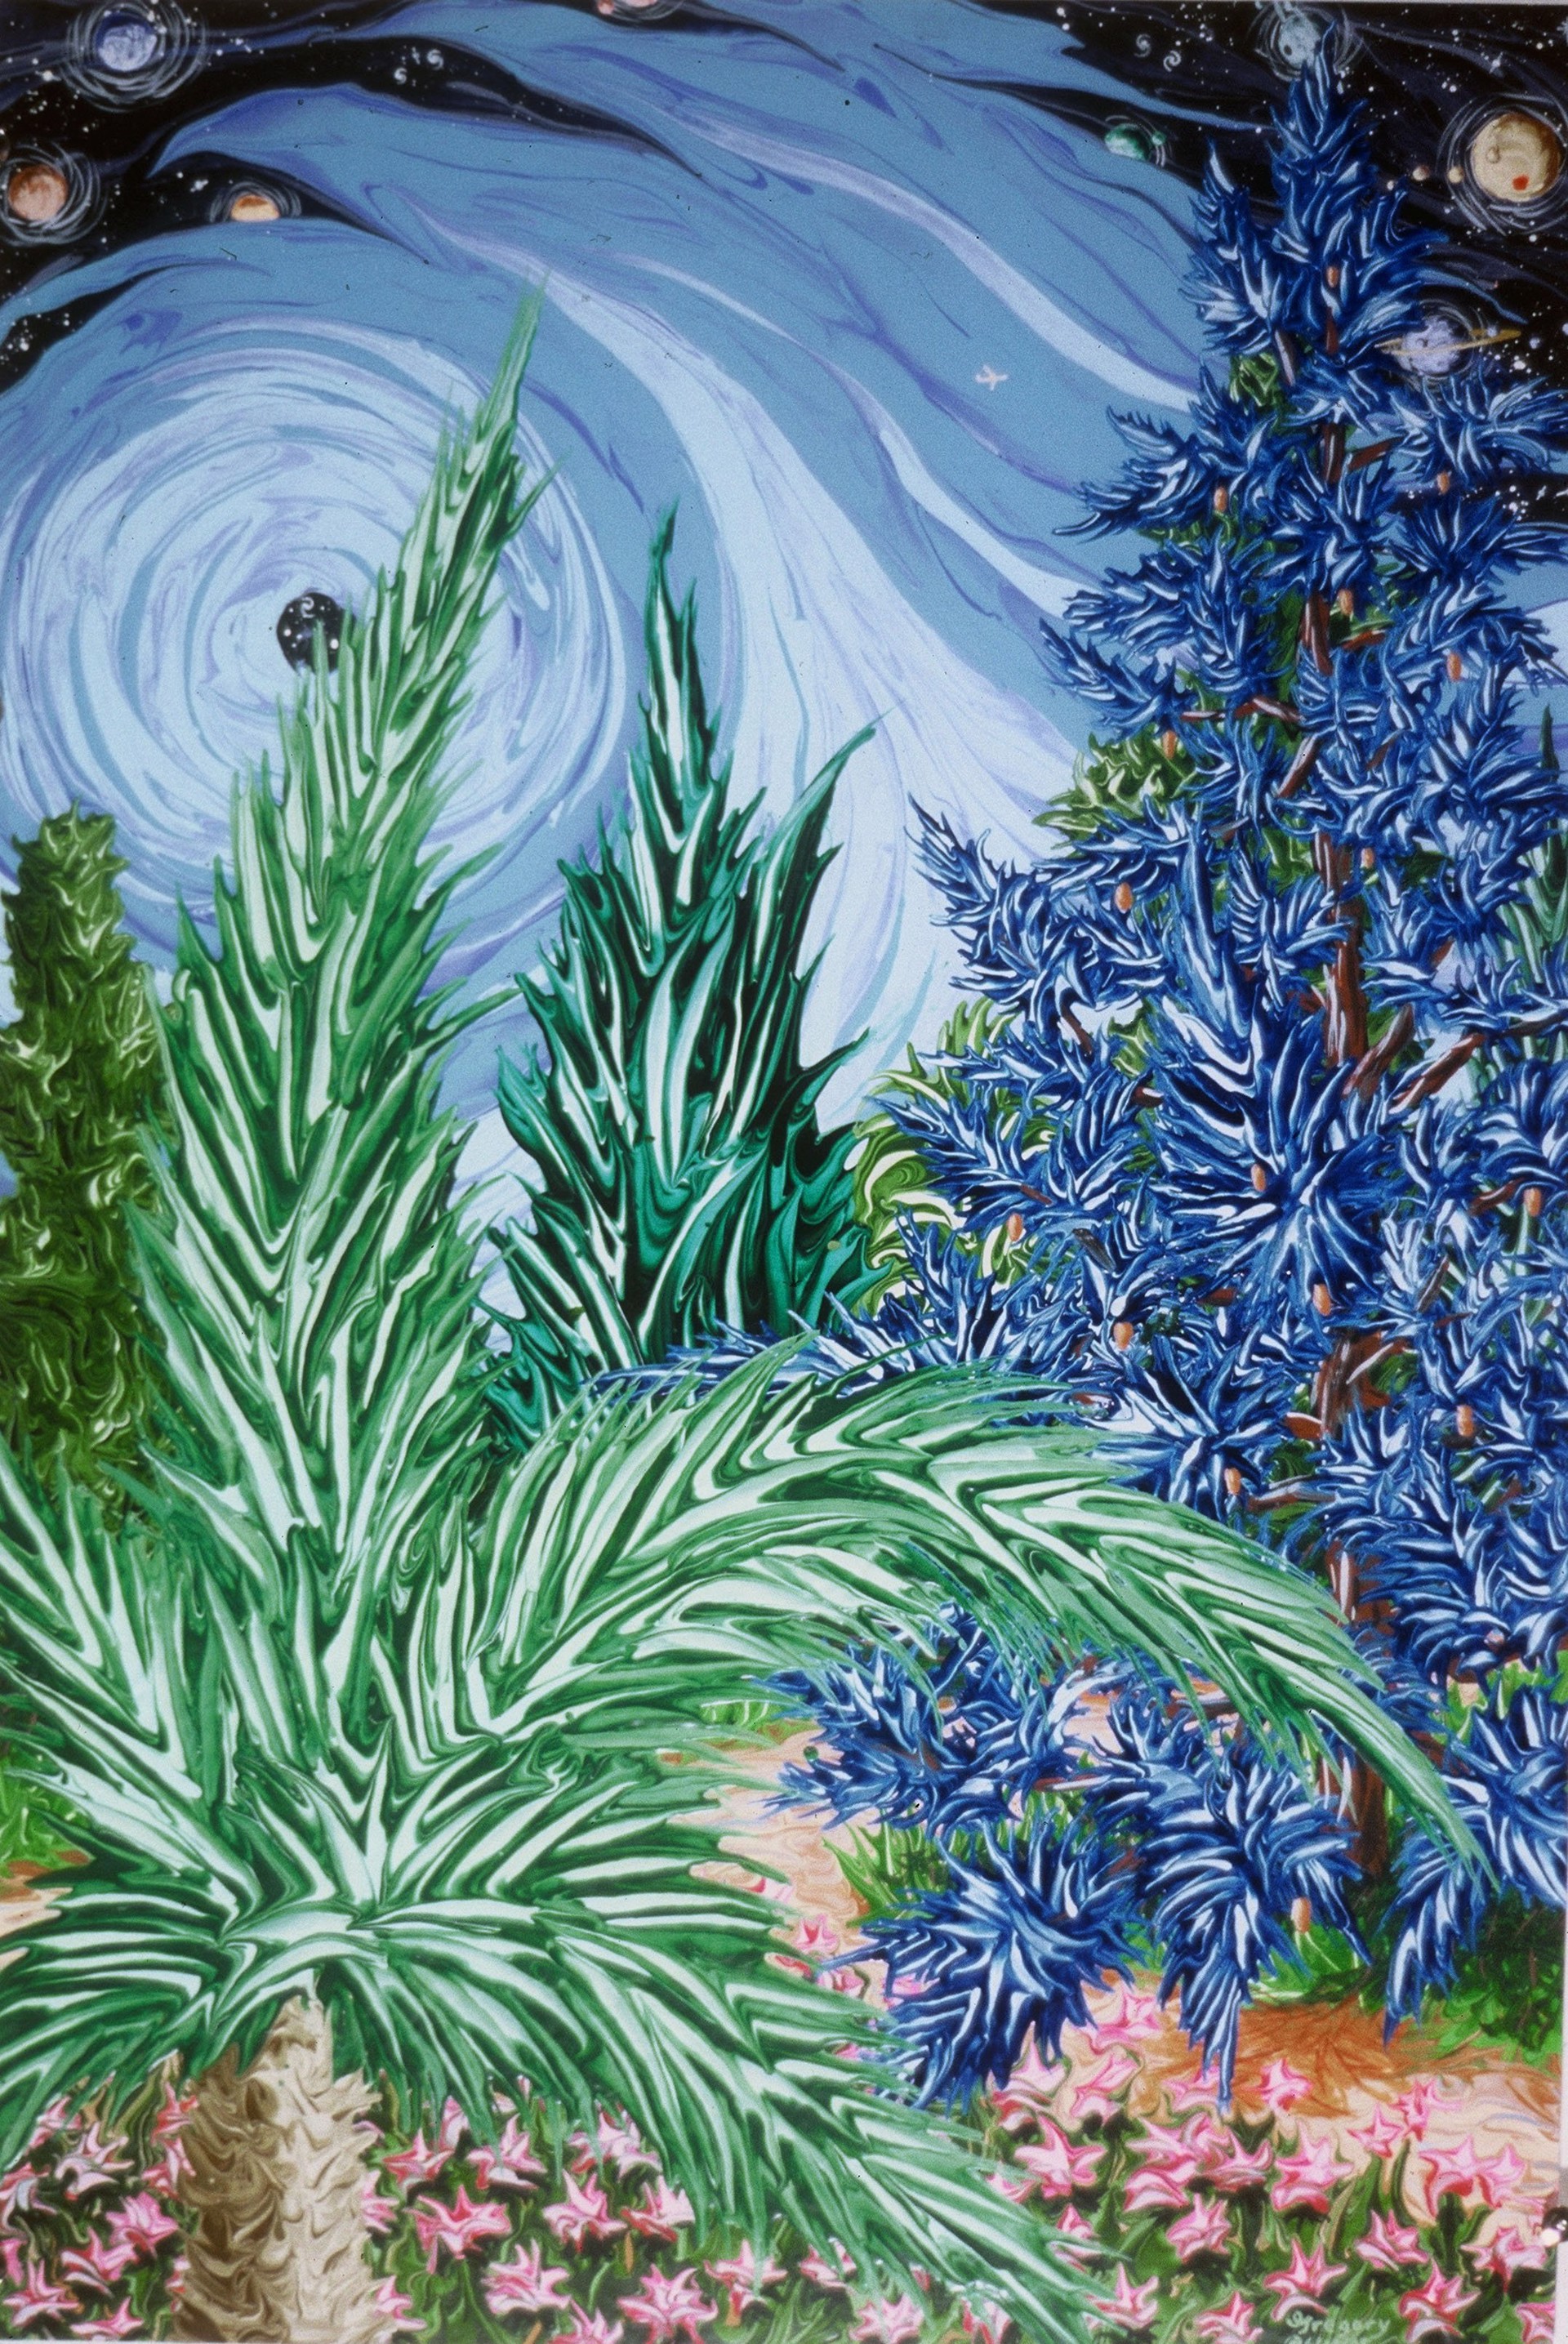 Garden with Blue Spruce by Gregory Horndeski